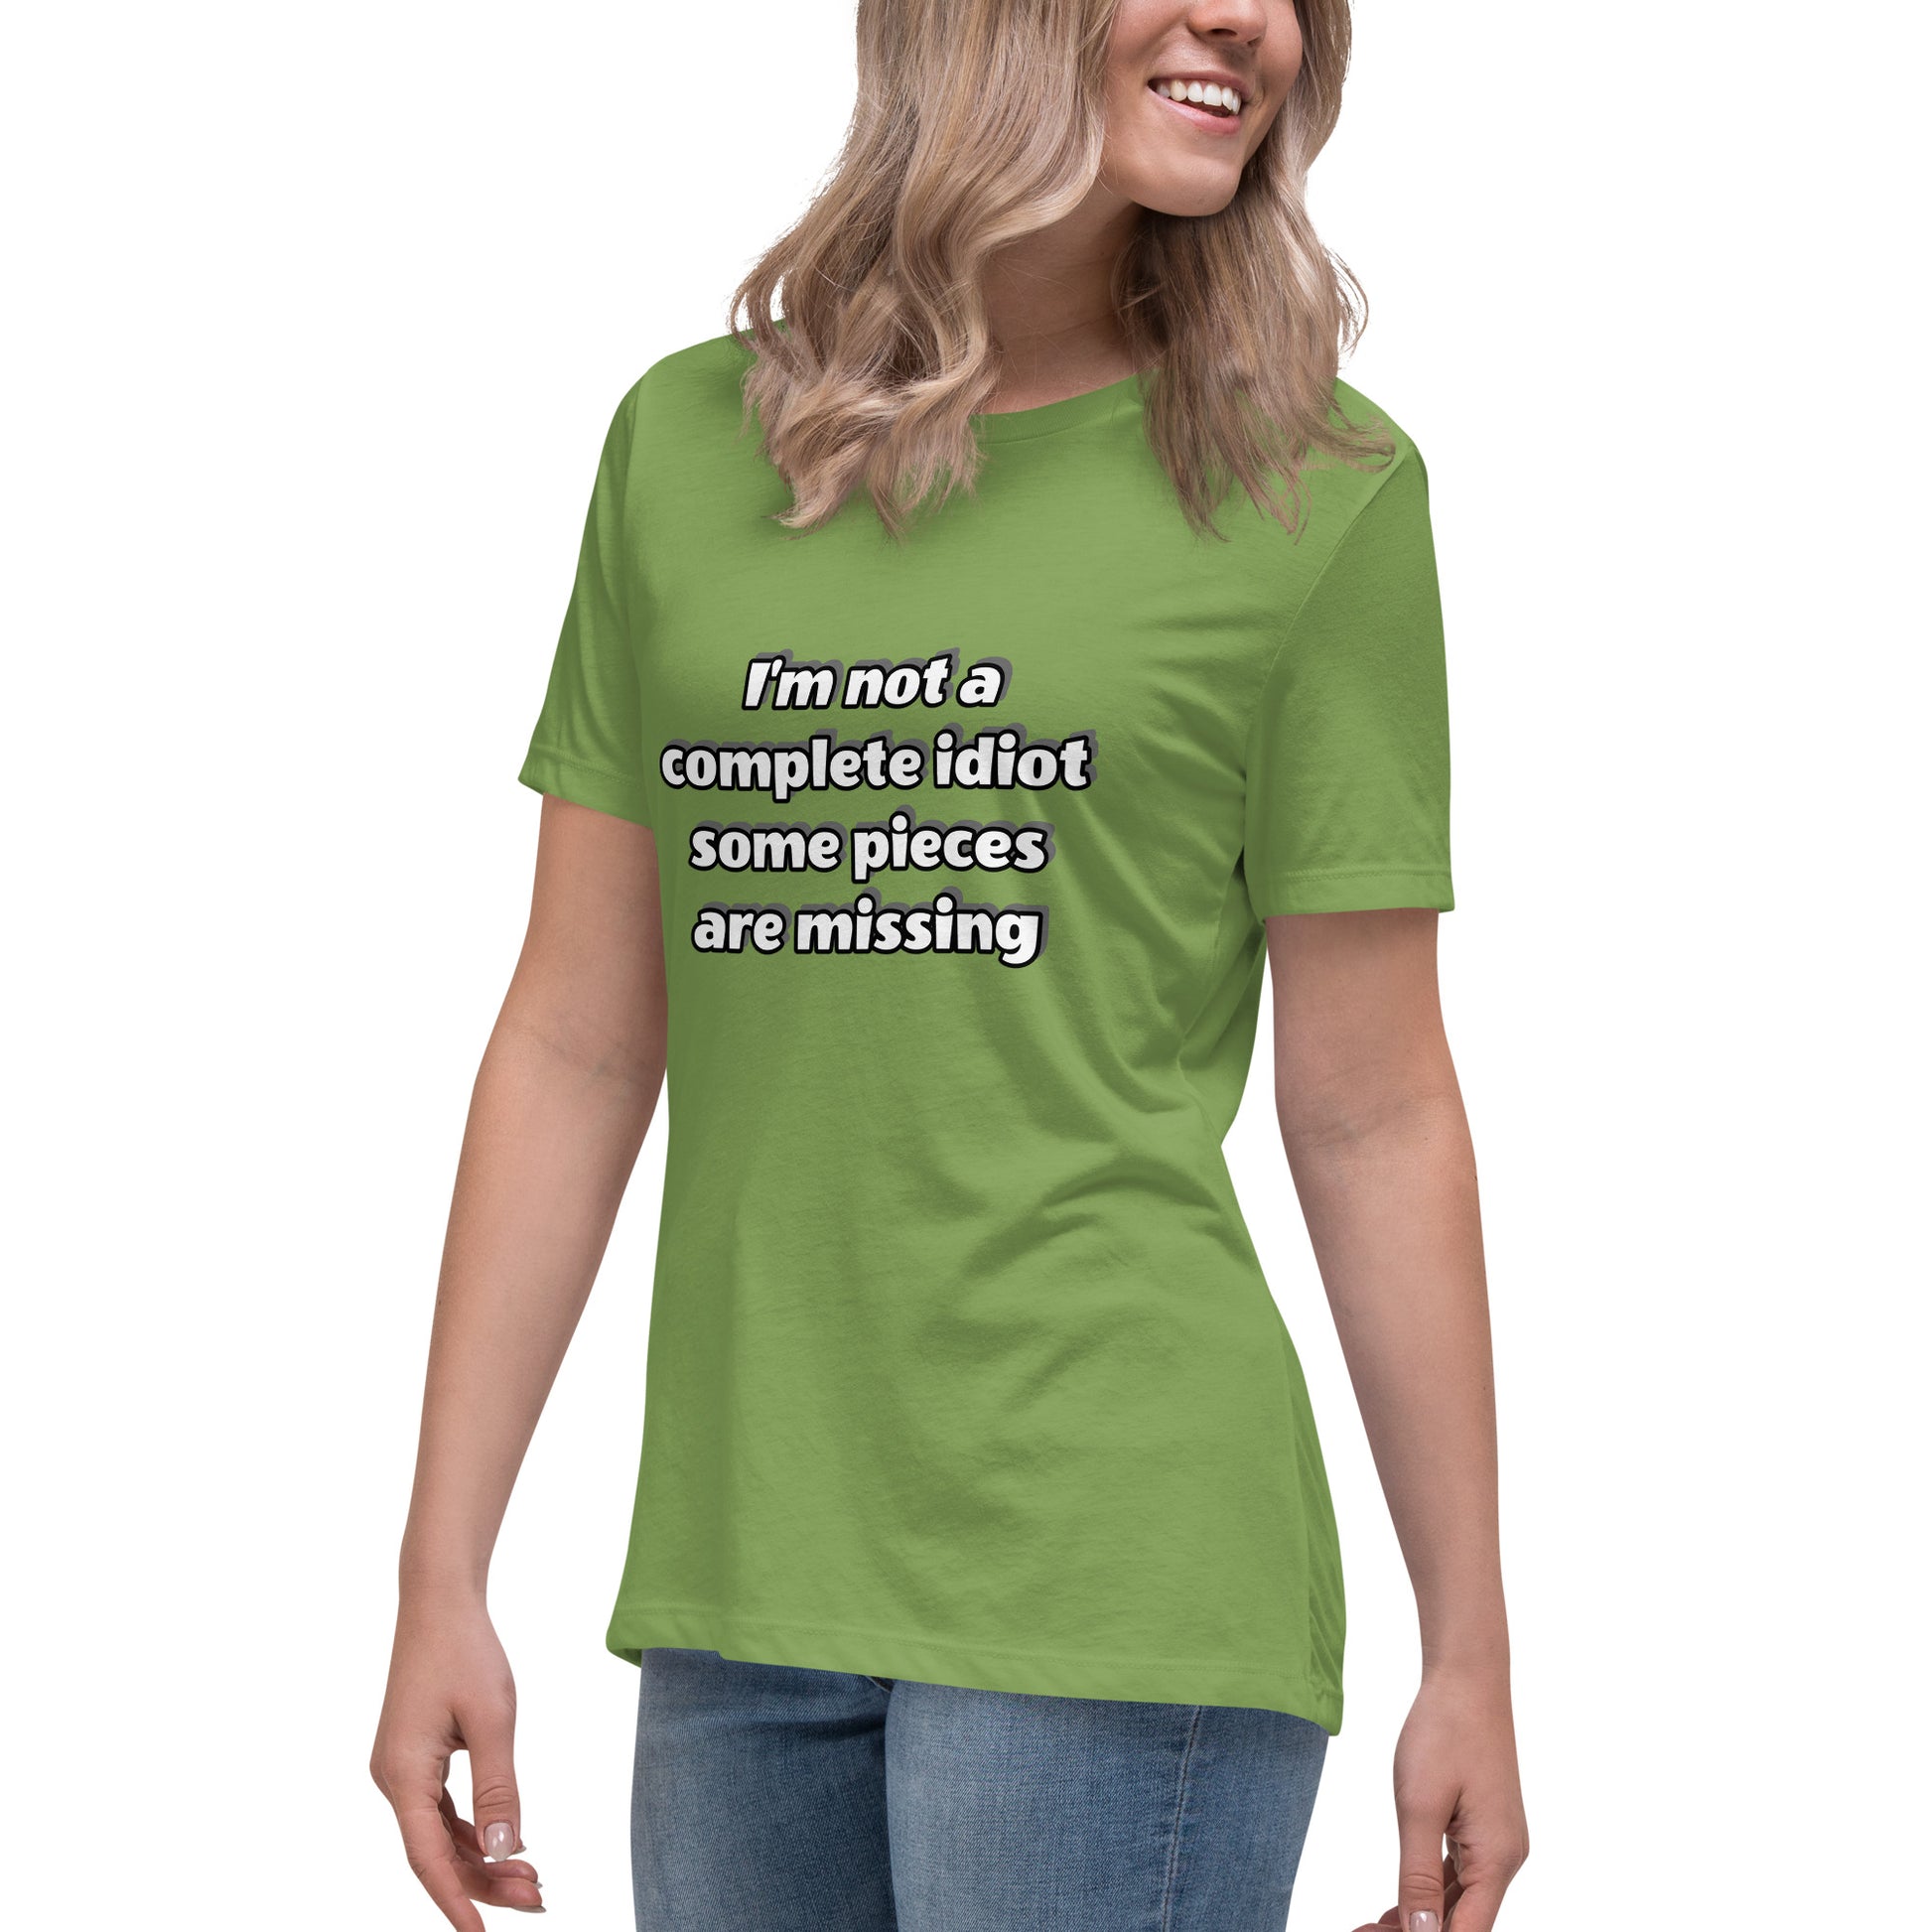 Women with leaf green t-shirt with text “I’m not a complete idiot, some pieces are missing”